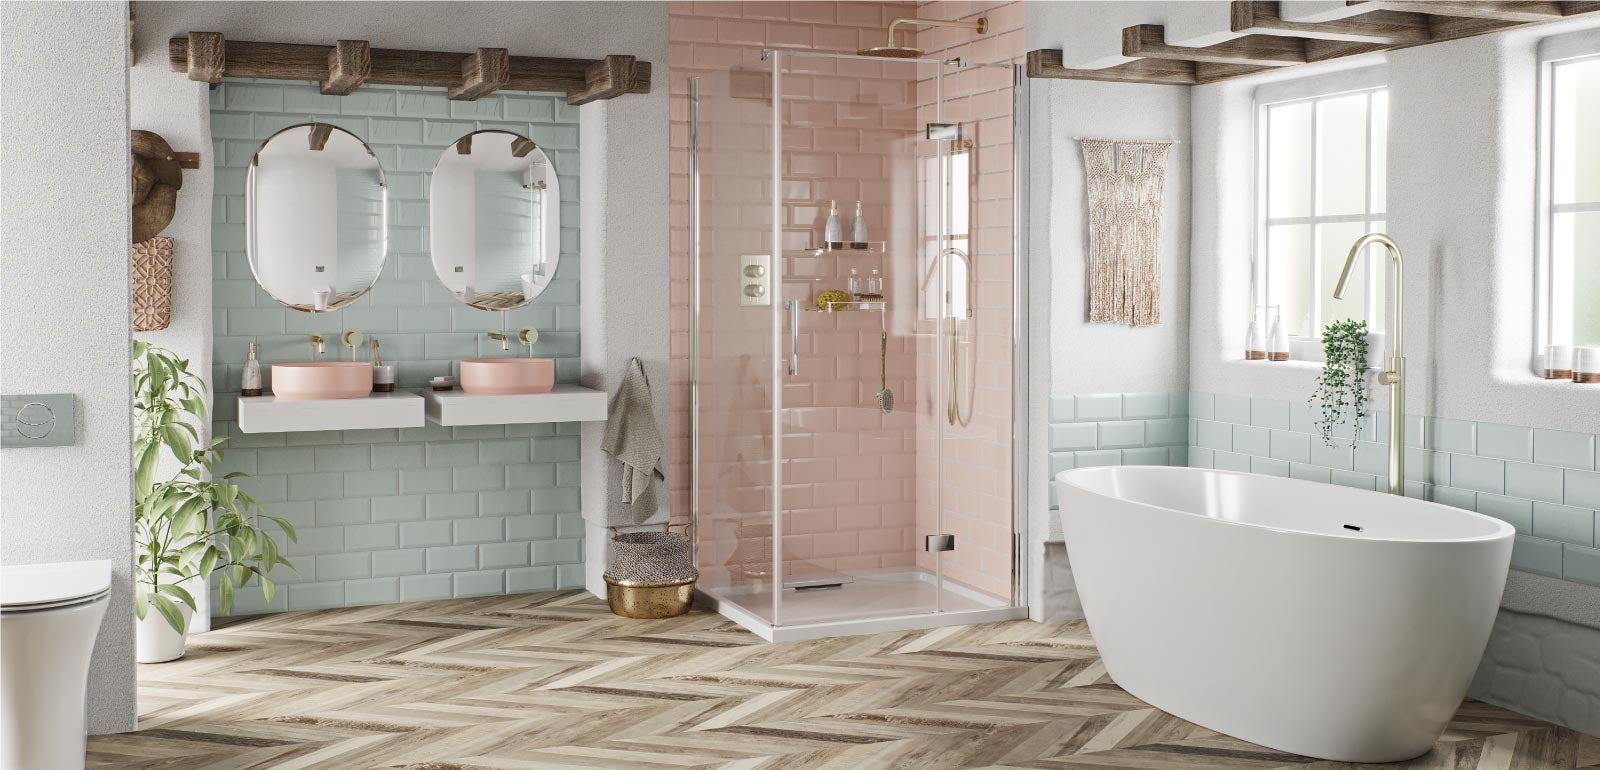 A feminine bathroom with a little bit of pink